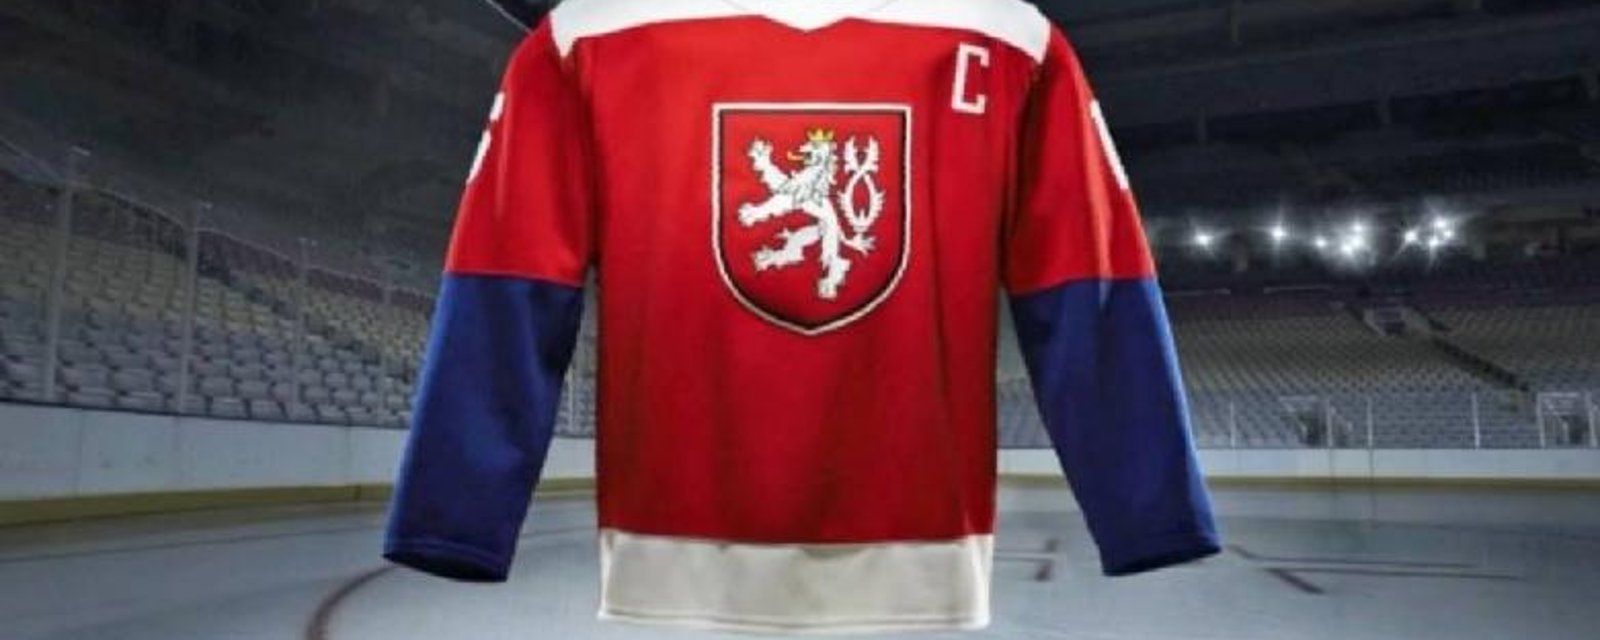 World Cup of Hockey jersey deemed “illegal” must now be changed.